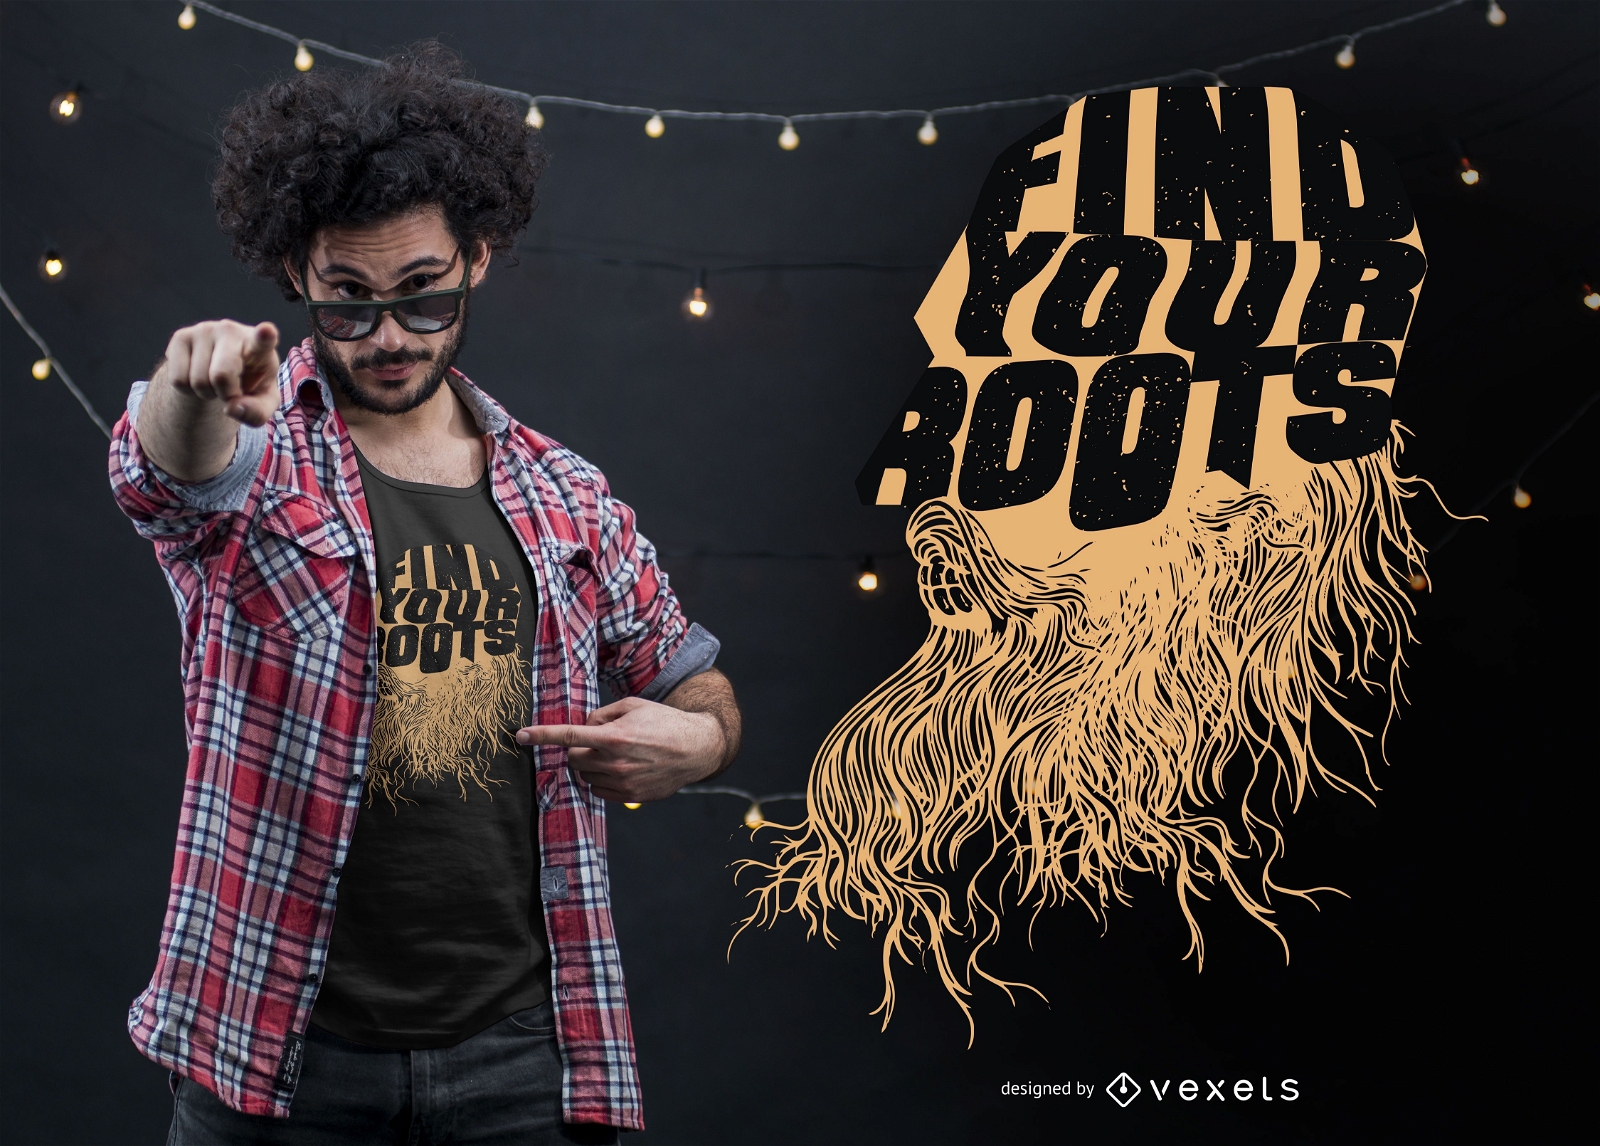 Find your roots t-shirt design